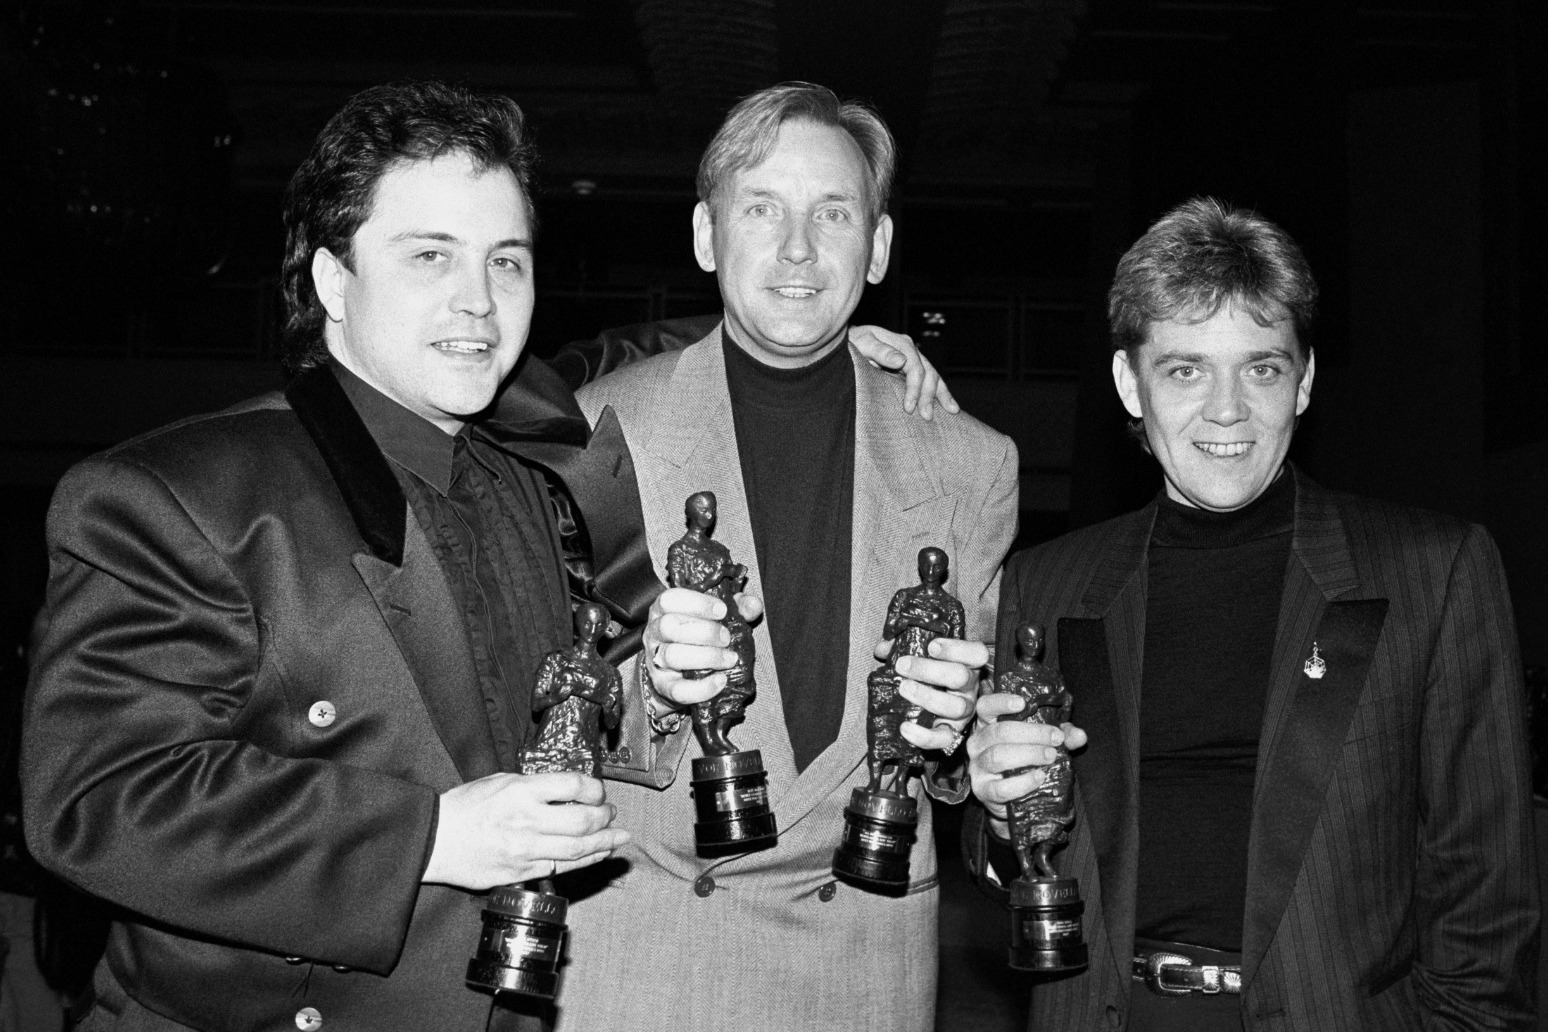 Kings of Pop Stock Aitken Waterman to reunite for Channel 5 documentary 